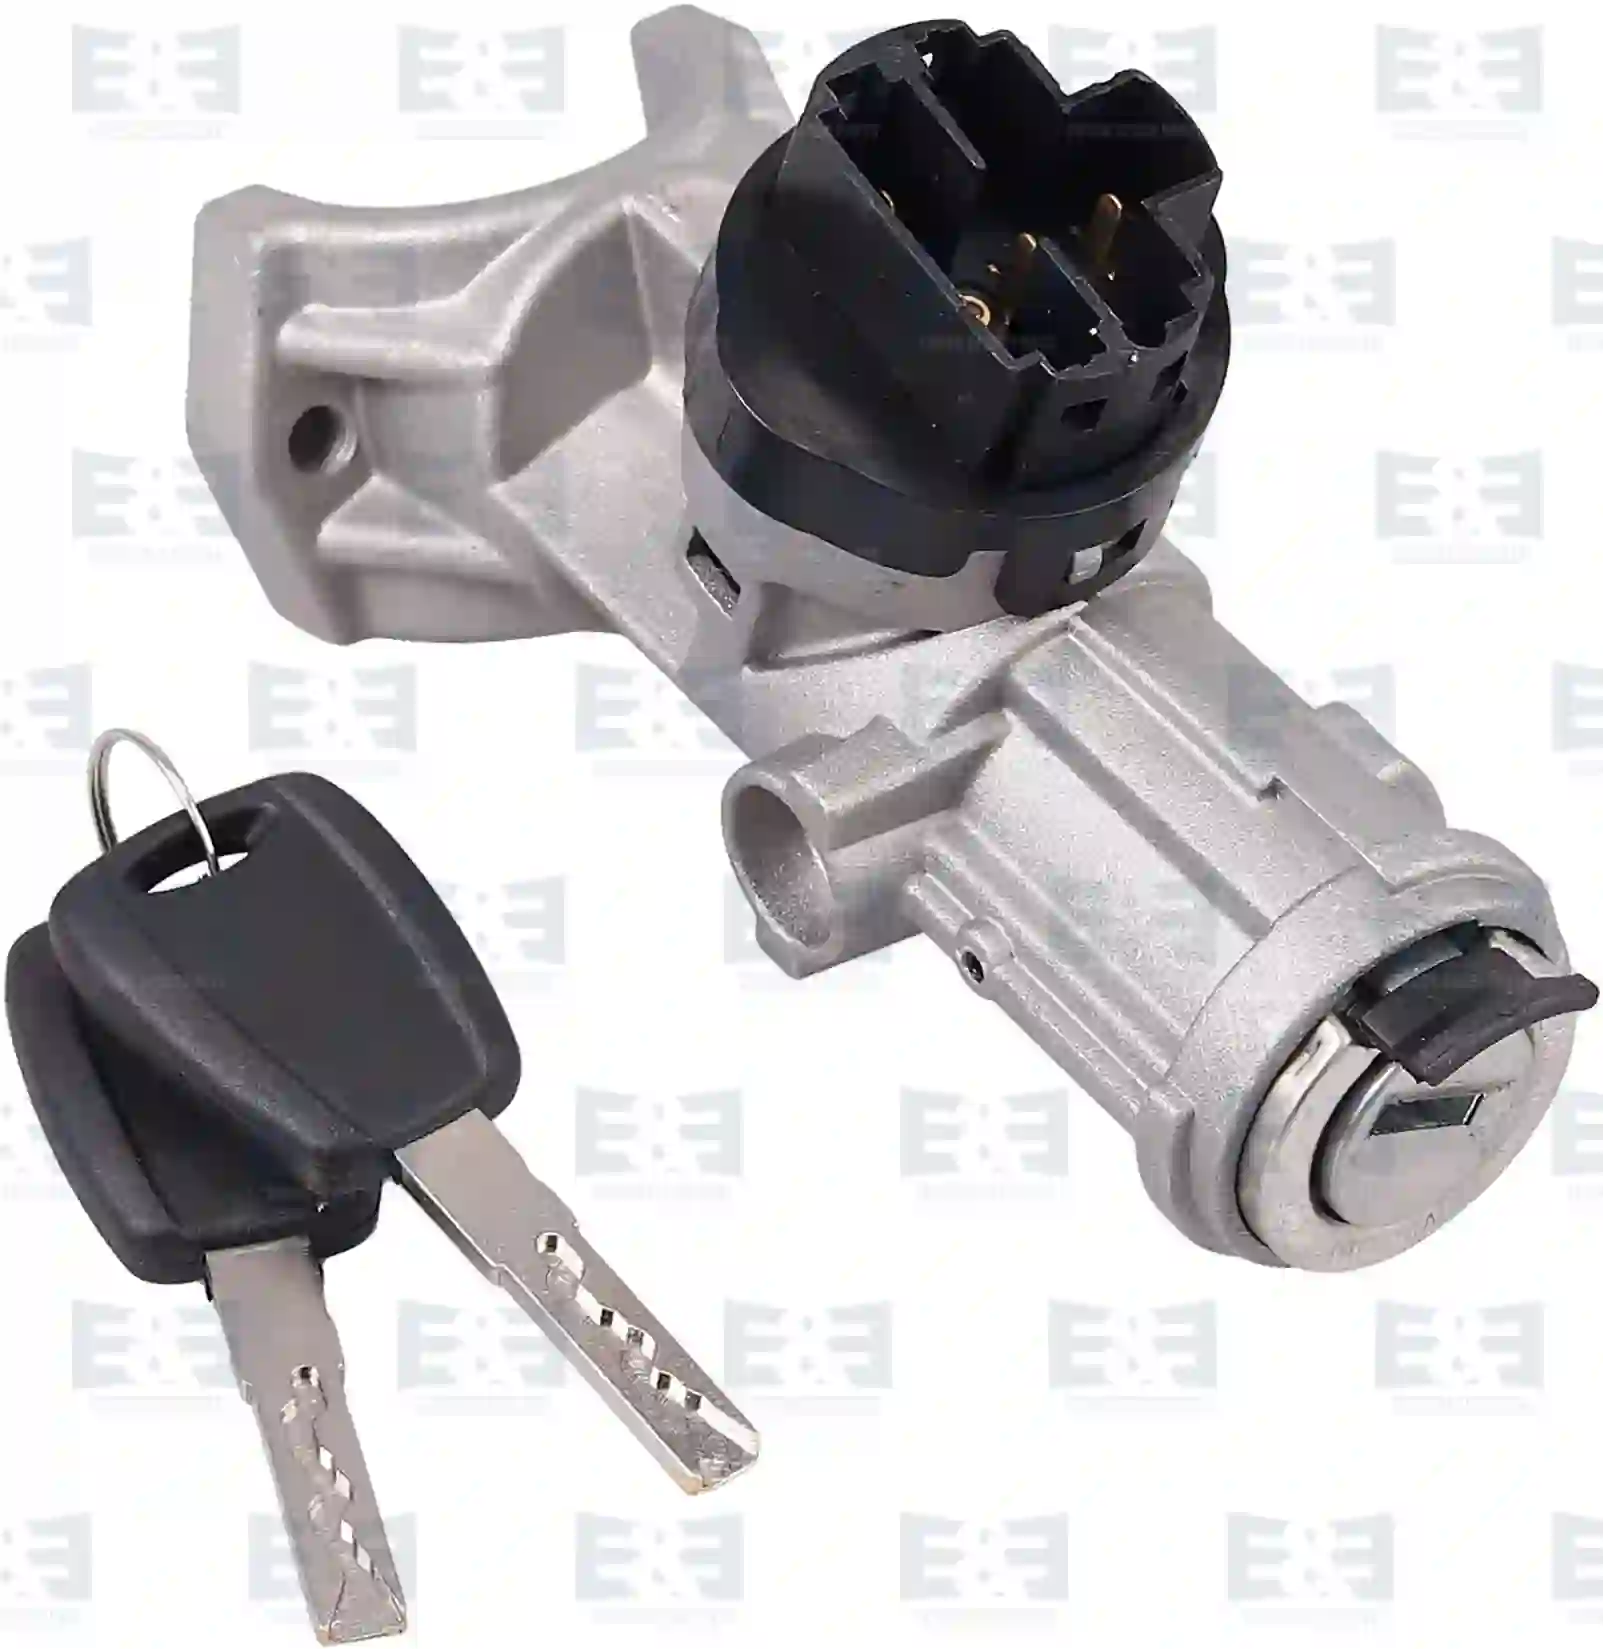  Steering lock, with ignition lock || E&E Truck Spare Parts | Truck Spare Parts, Auotomotive Spare Parts